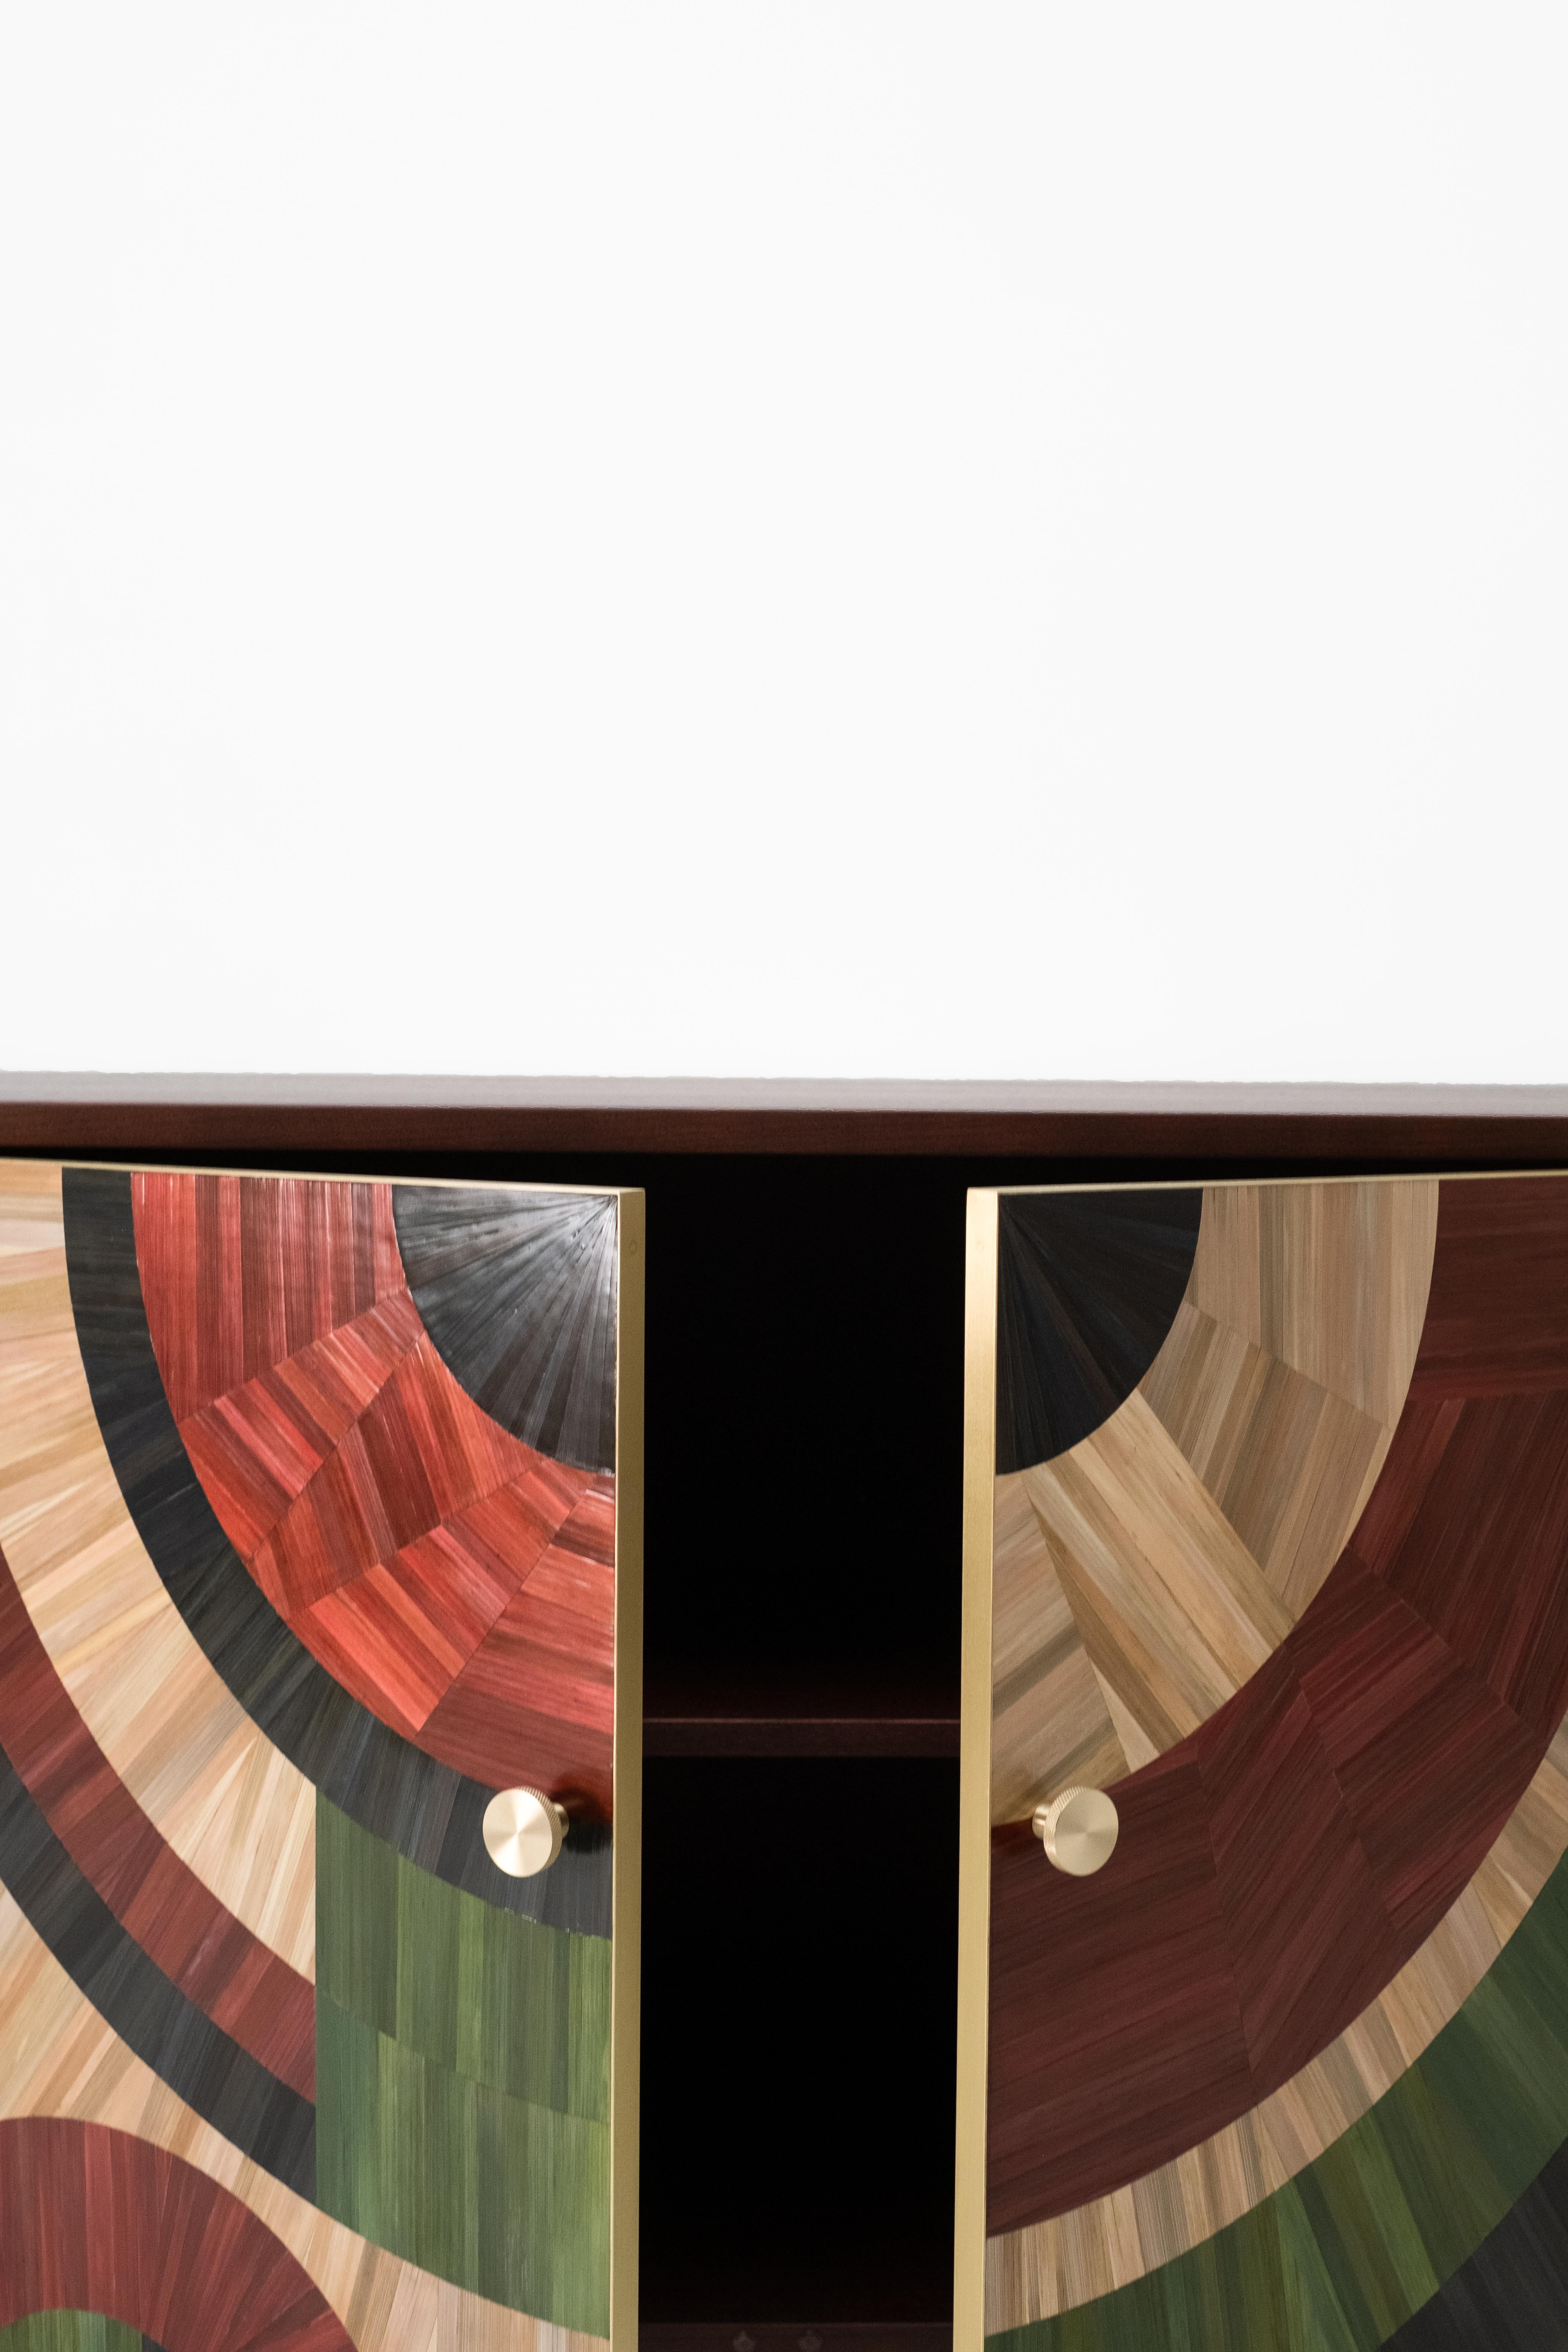 Solomia straw Marquetry Art Deco oakwood cabinet green red black natural by RUDA Studio

The cabinet Solomia is inspired by the fertility of our land. The ornament is made in the ancient straw Marquetry technique in red, green, black soil, and wheat